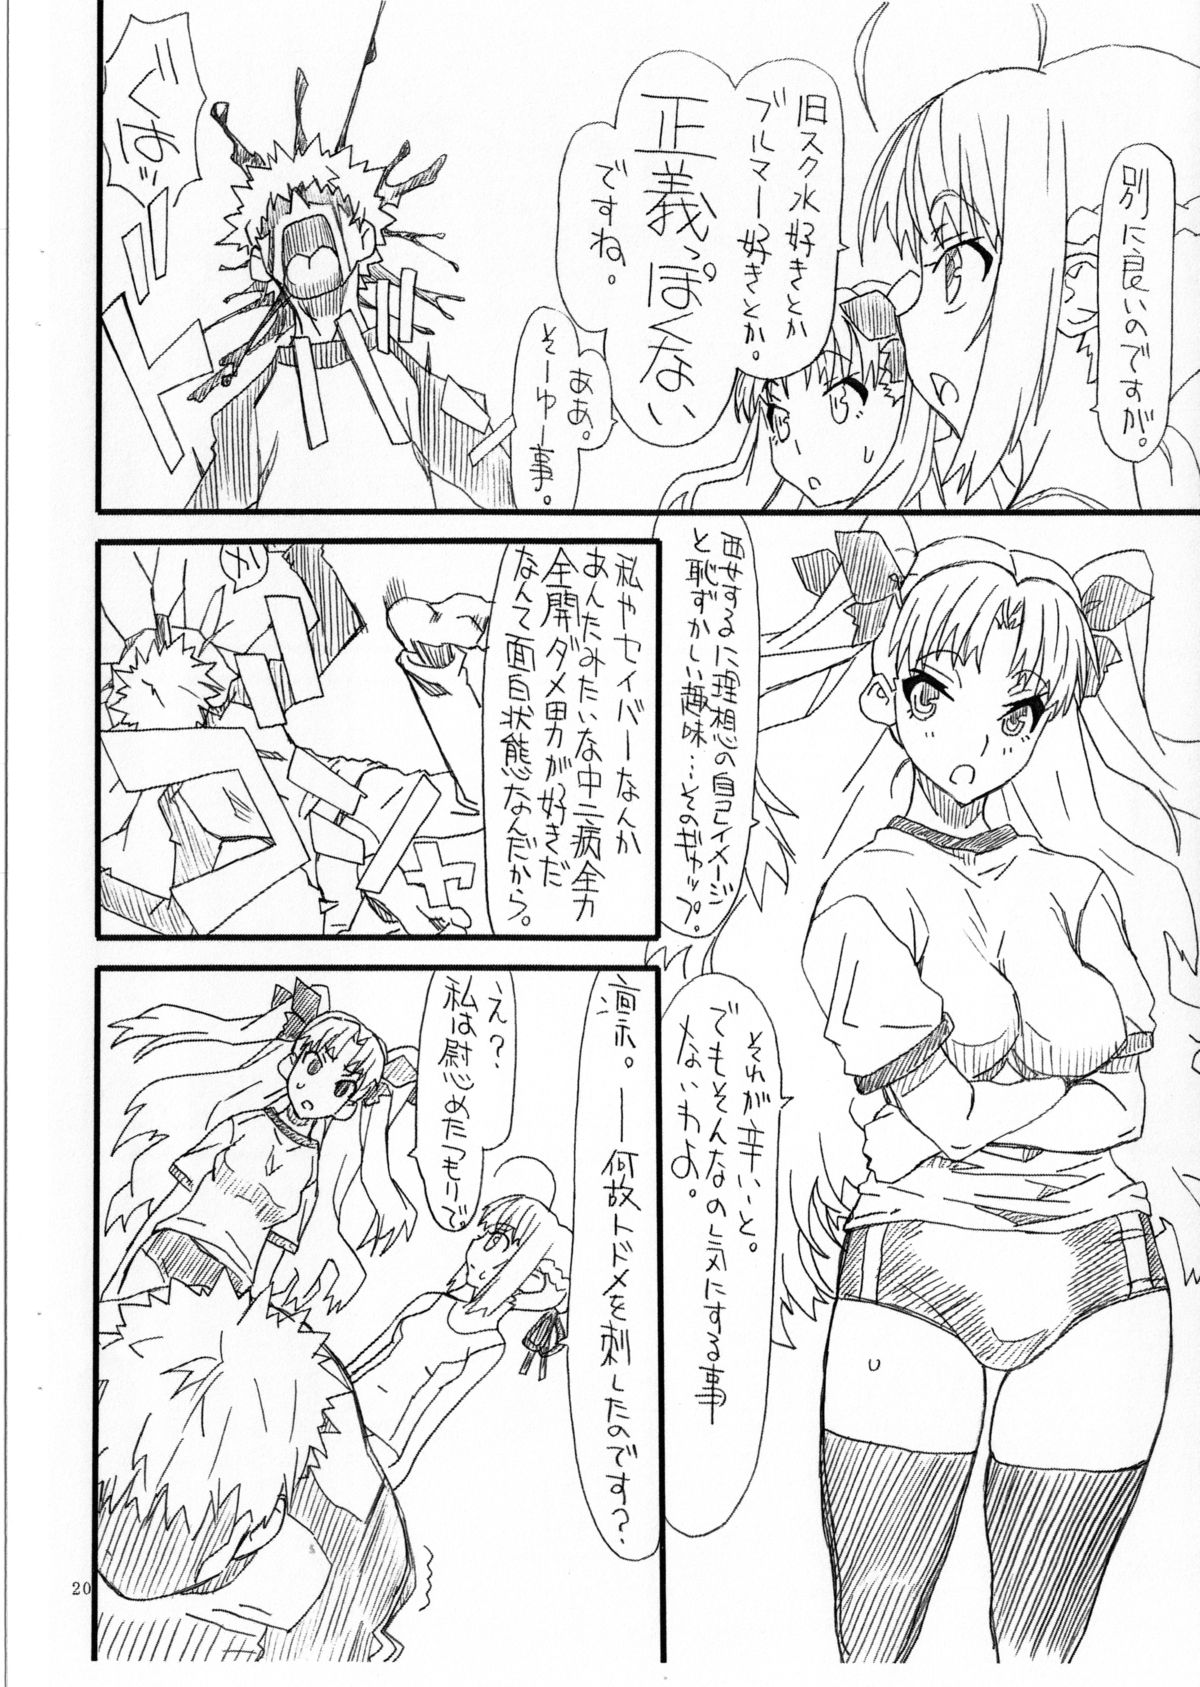 (SC65) [Power Slide (Uttorikun)] Rin to saber 1st Ver0.5 (Fate/stay night) page 21 full